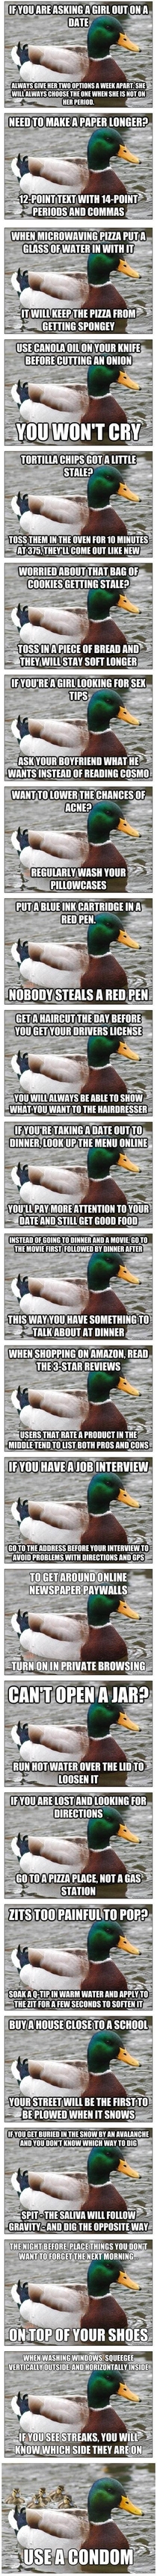 Bringing Actual Advice Mallard back to its roots